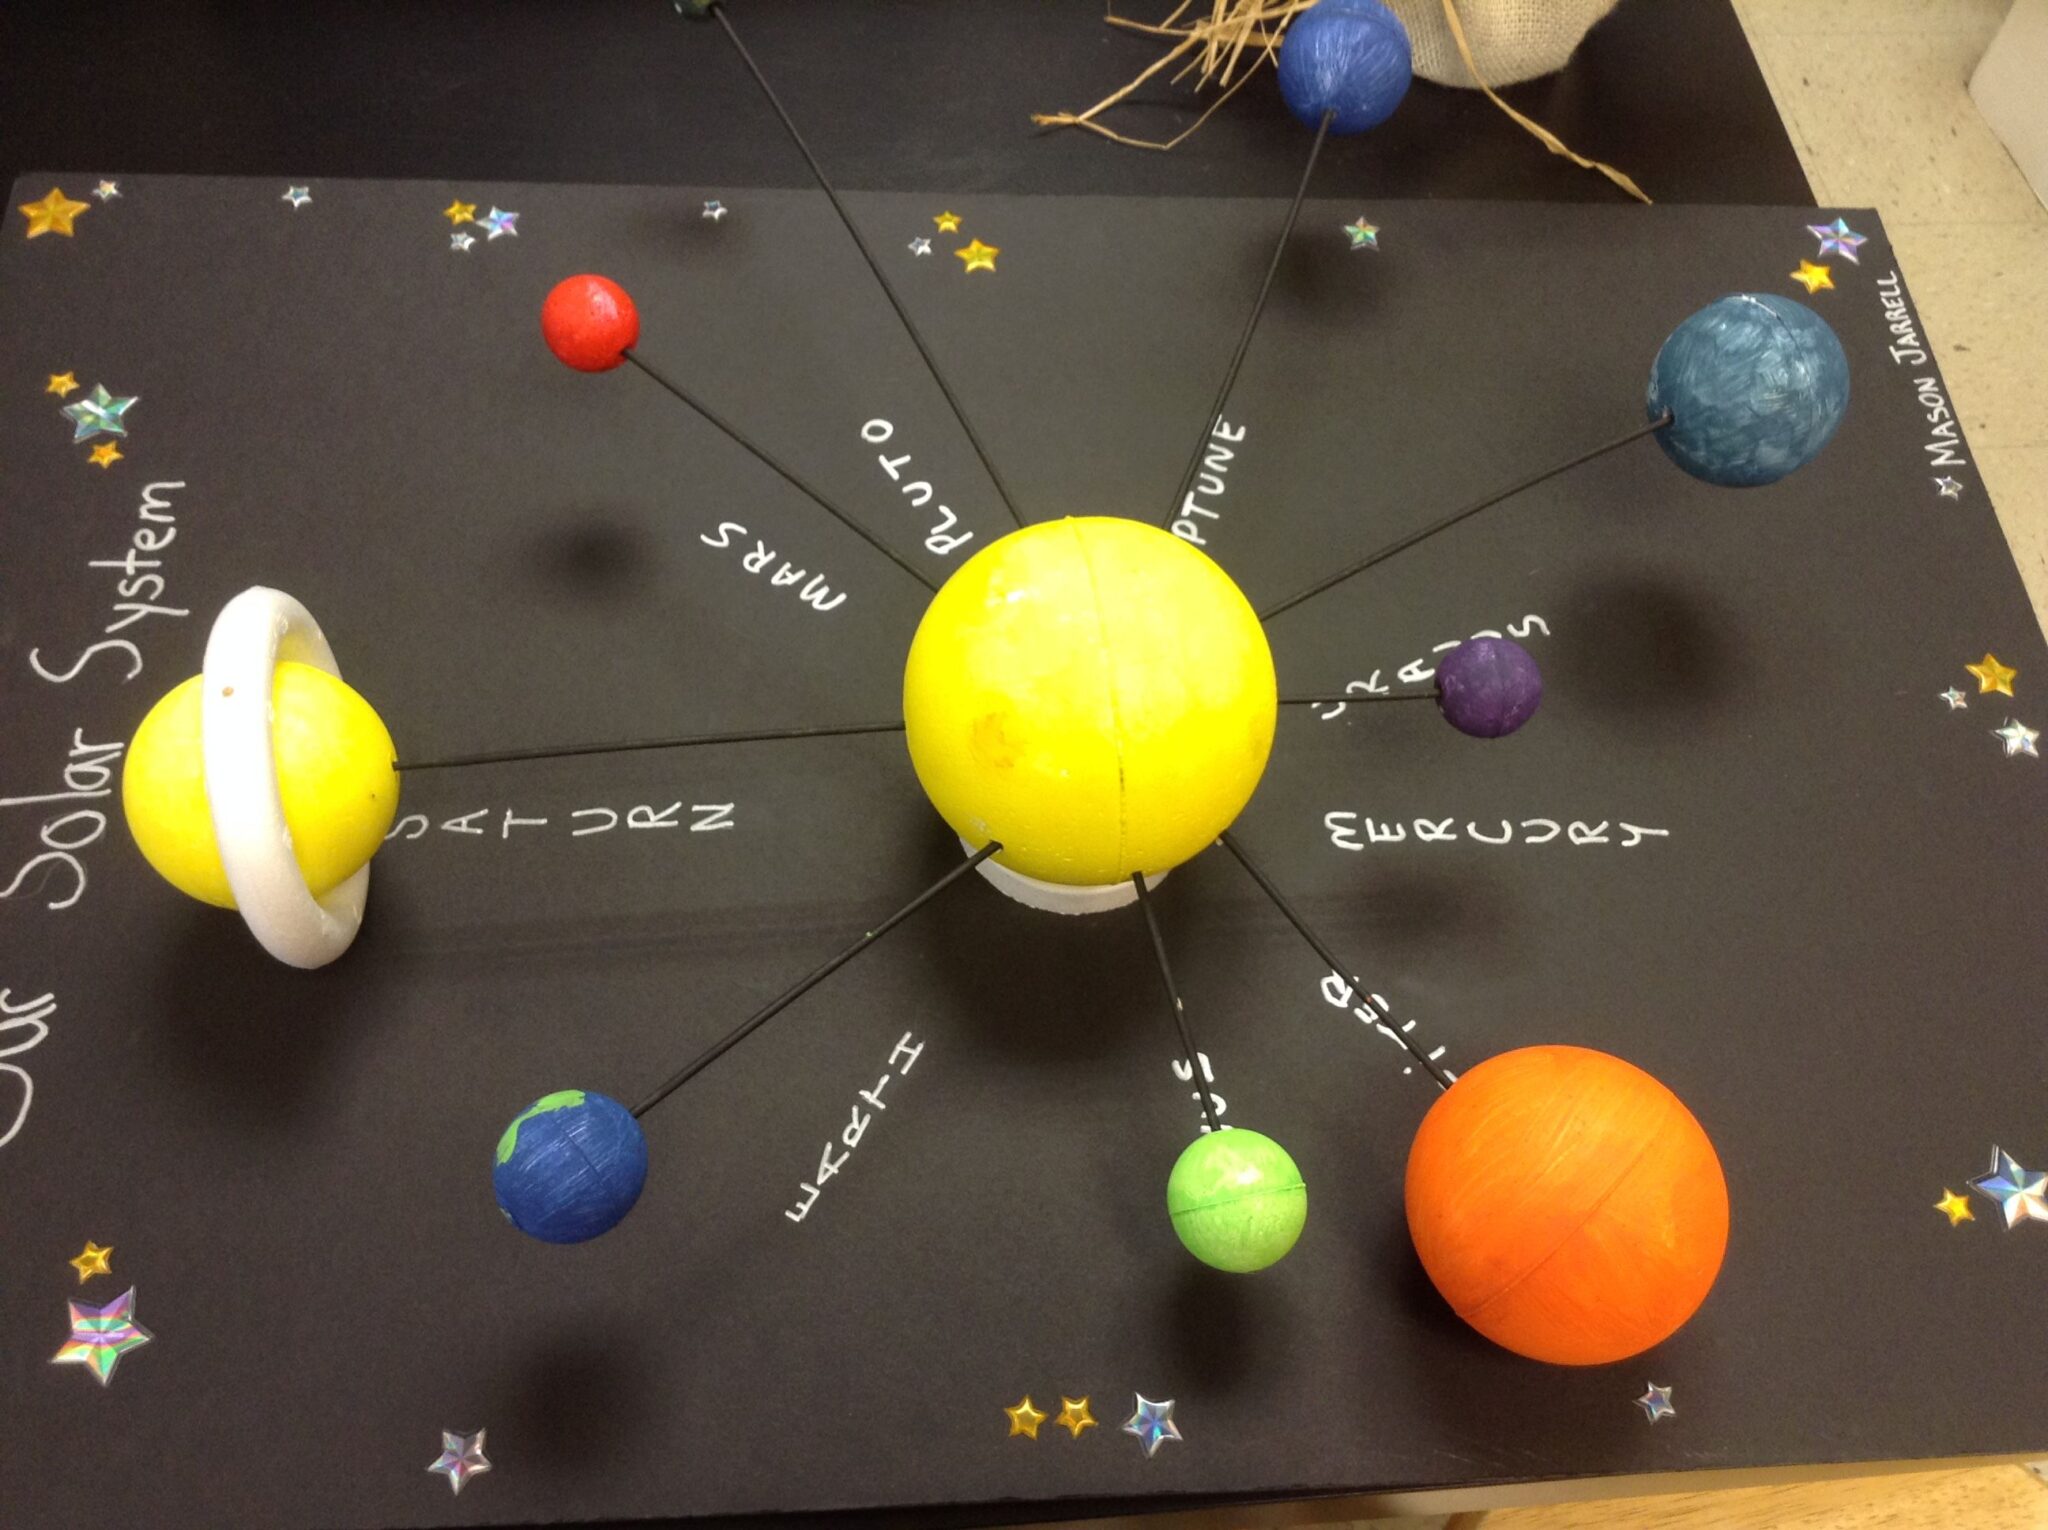 making-a-model-of-the-solar-system-pmcaonline